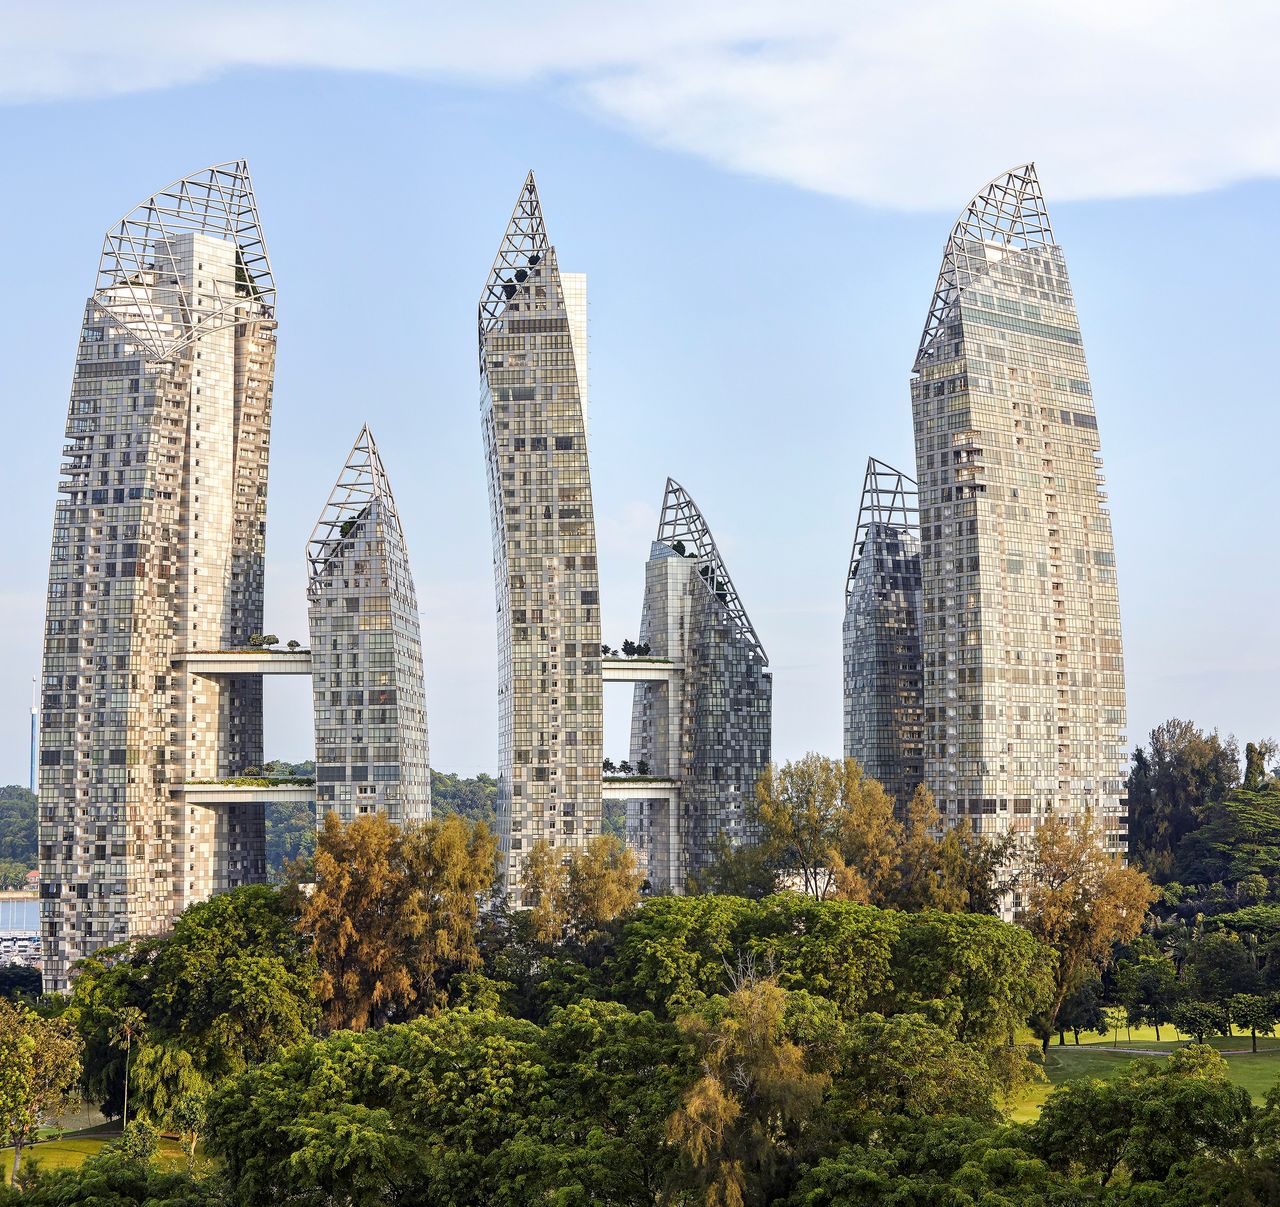 Reflections at Keppel Bay, Singapore is a condominium development with 6 glass towers.